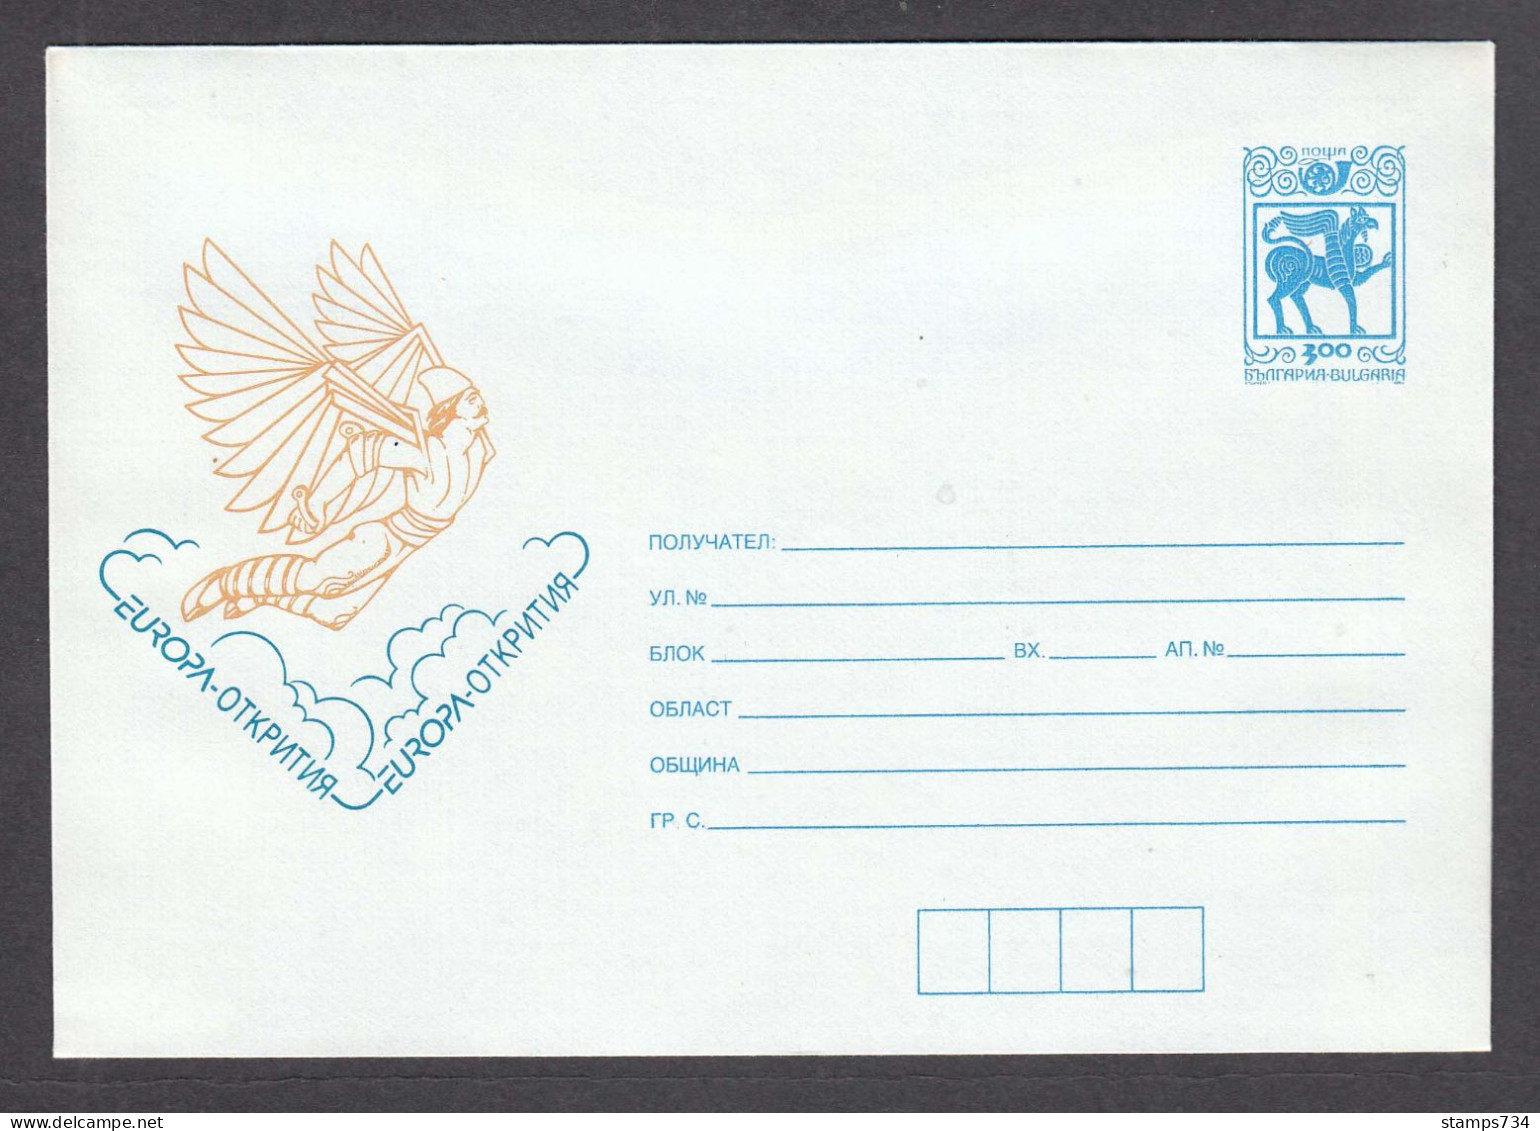 PS 1216/1994 - Mint, EUROPA: Discoveries, Post. Stationery - Bulgaria - Enveloppes